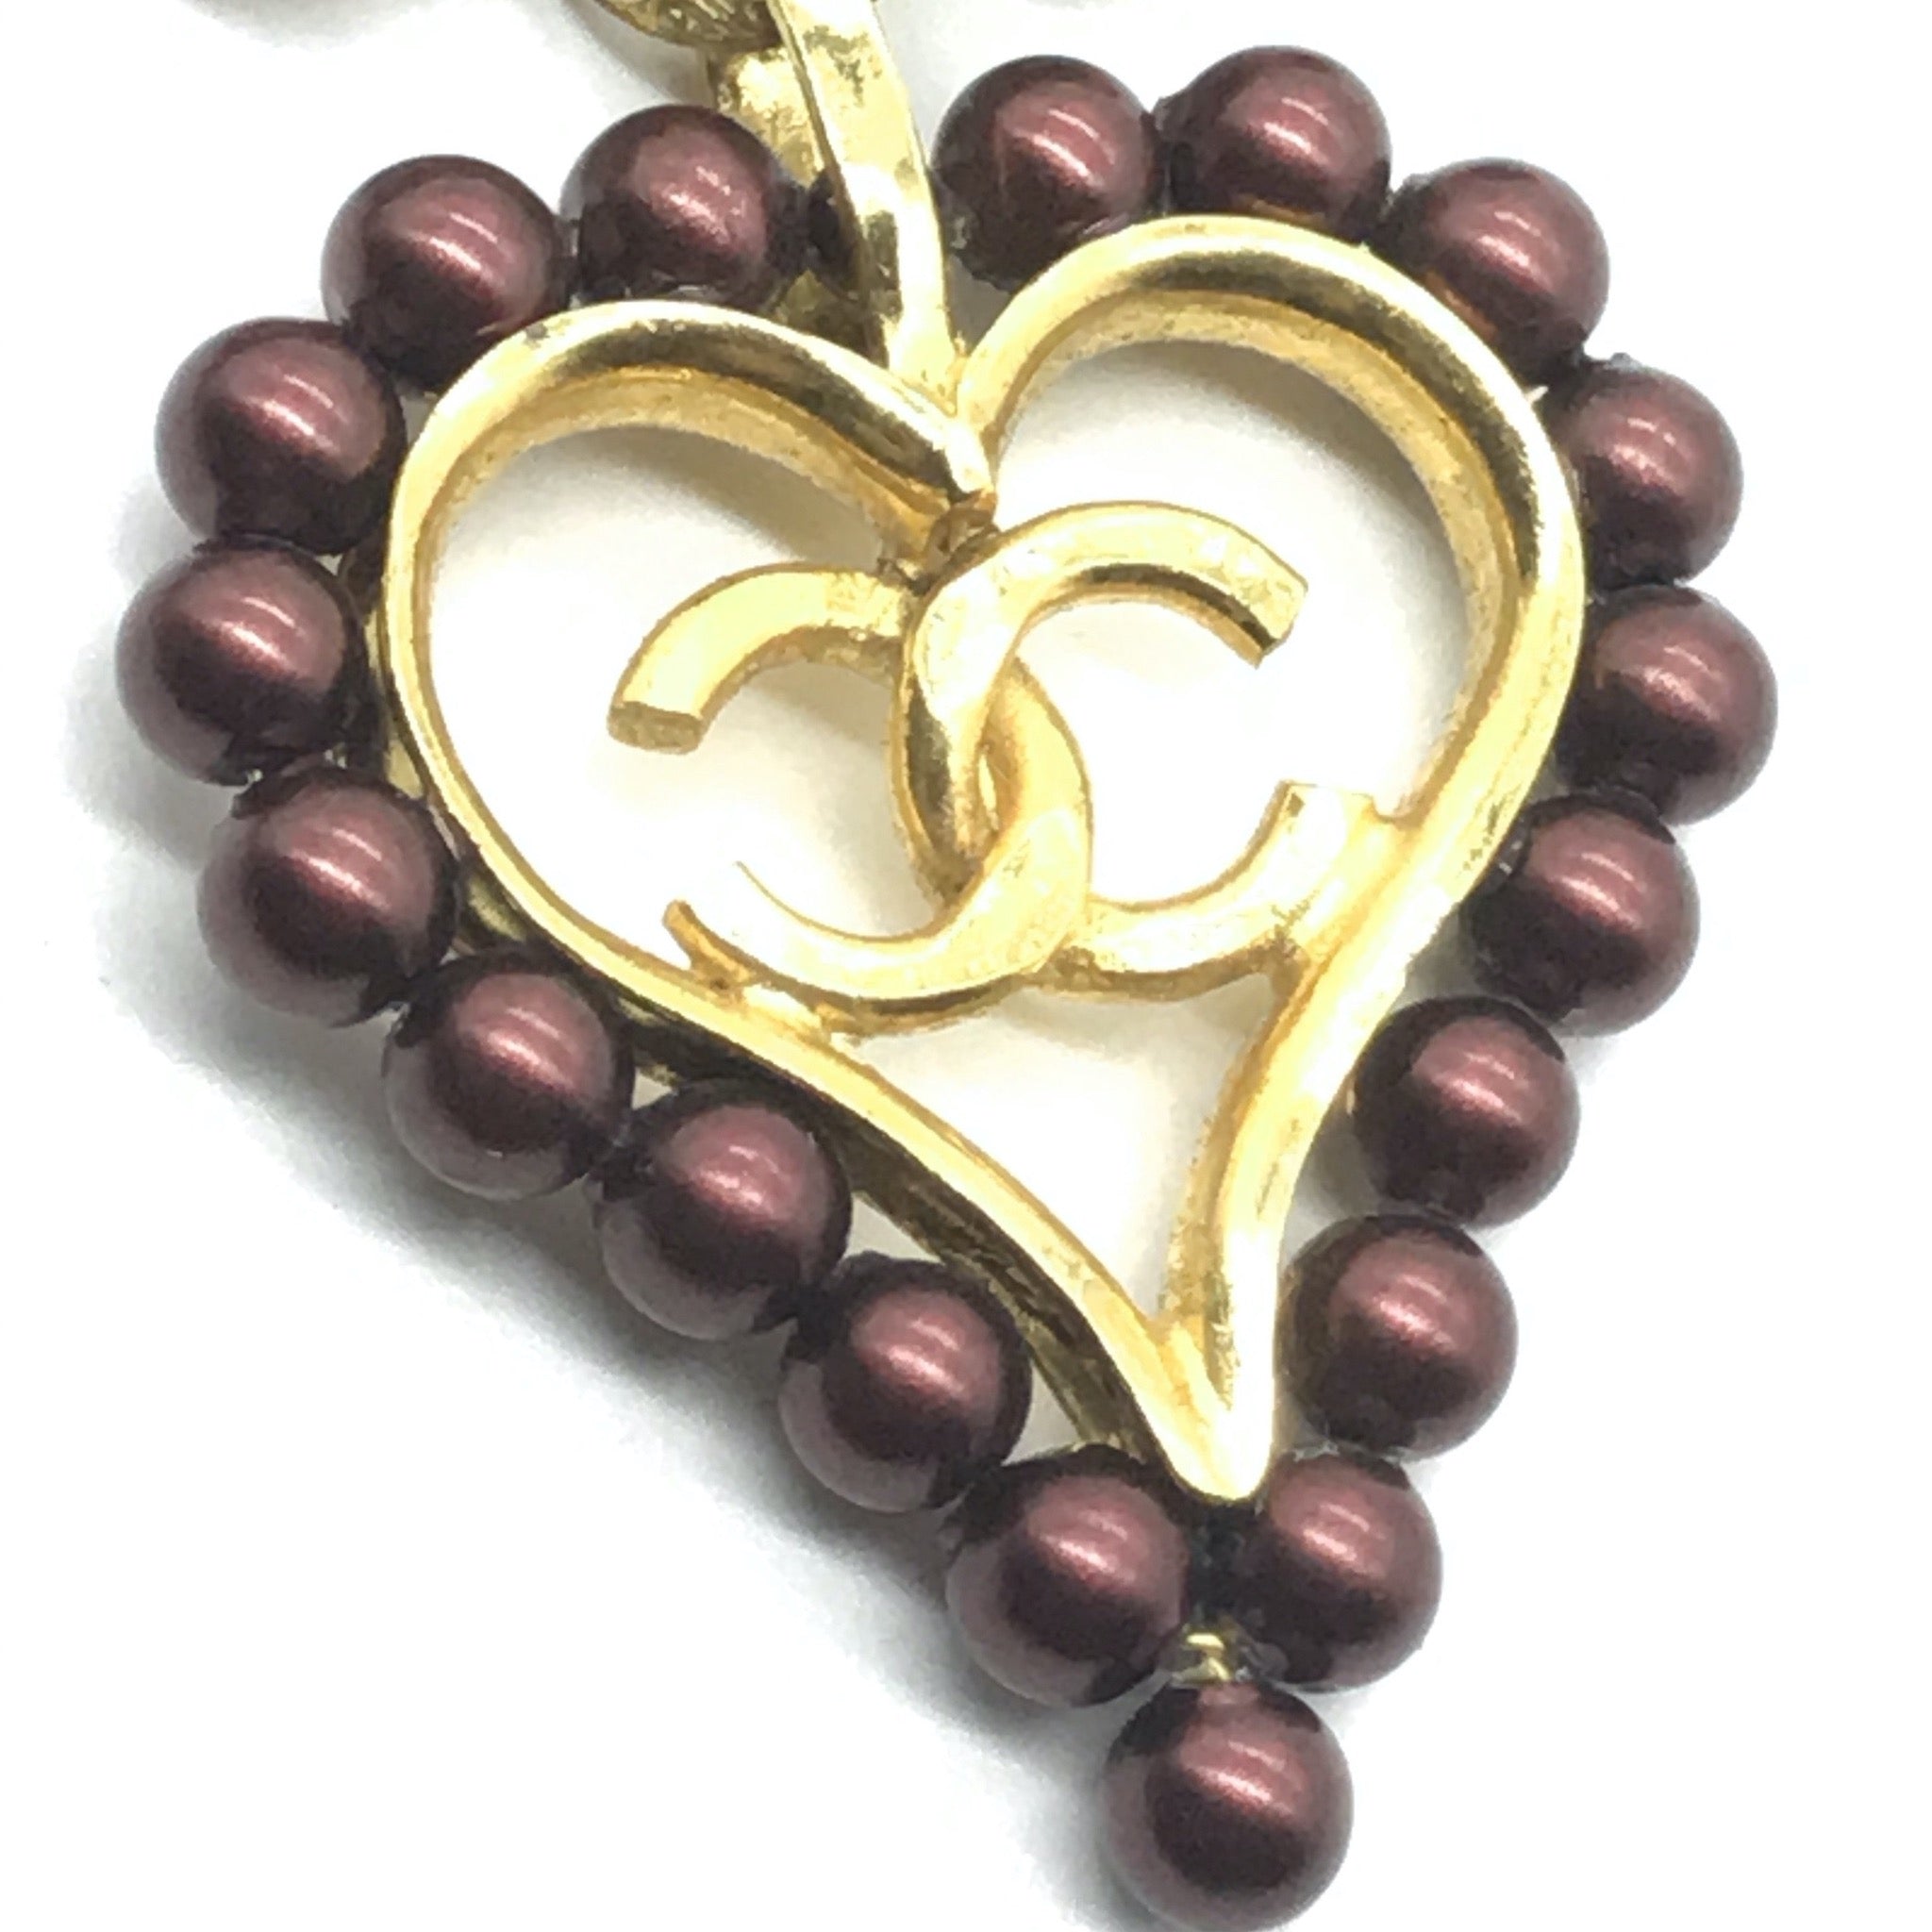 Repurposed dreamy Chanel Heart Necklace Real freshwater pearls - Dreamized